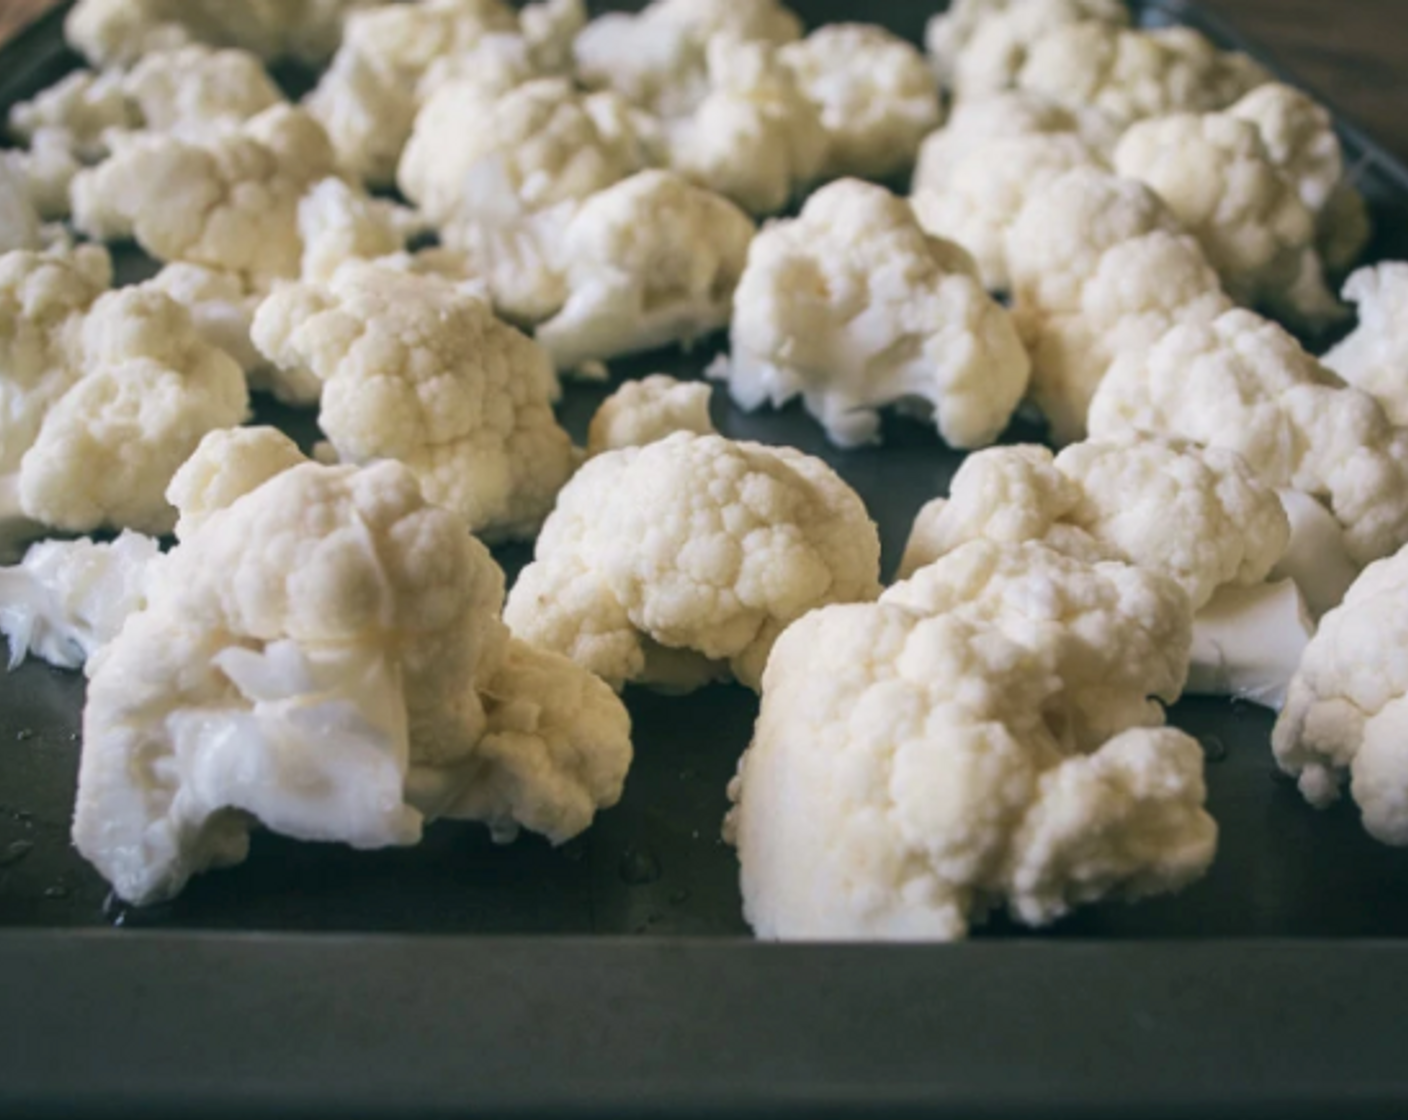 step 3 Wash and cut Cauliflower (1 head) into florets and spread out in single layer on prepped cooking sheet.